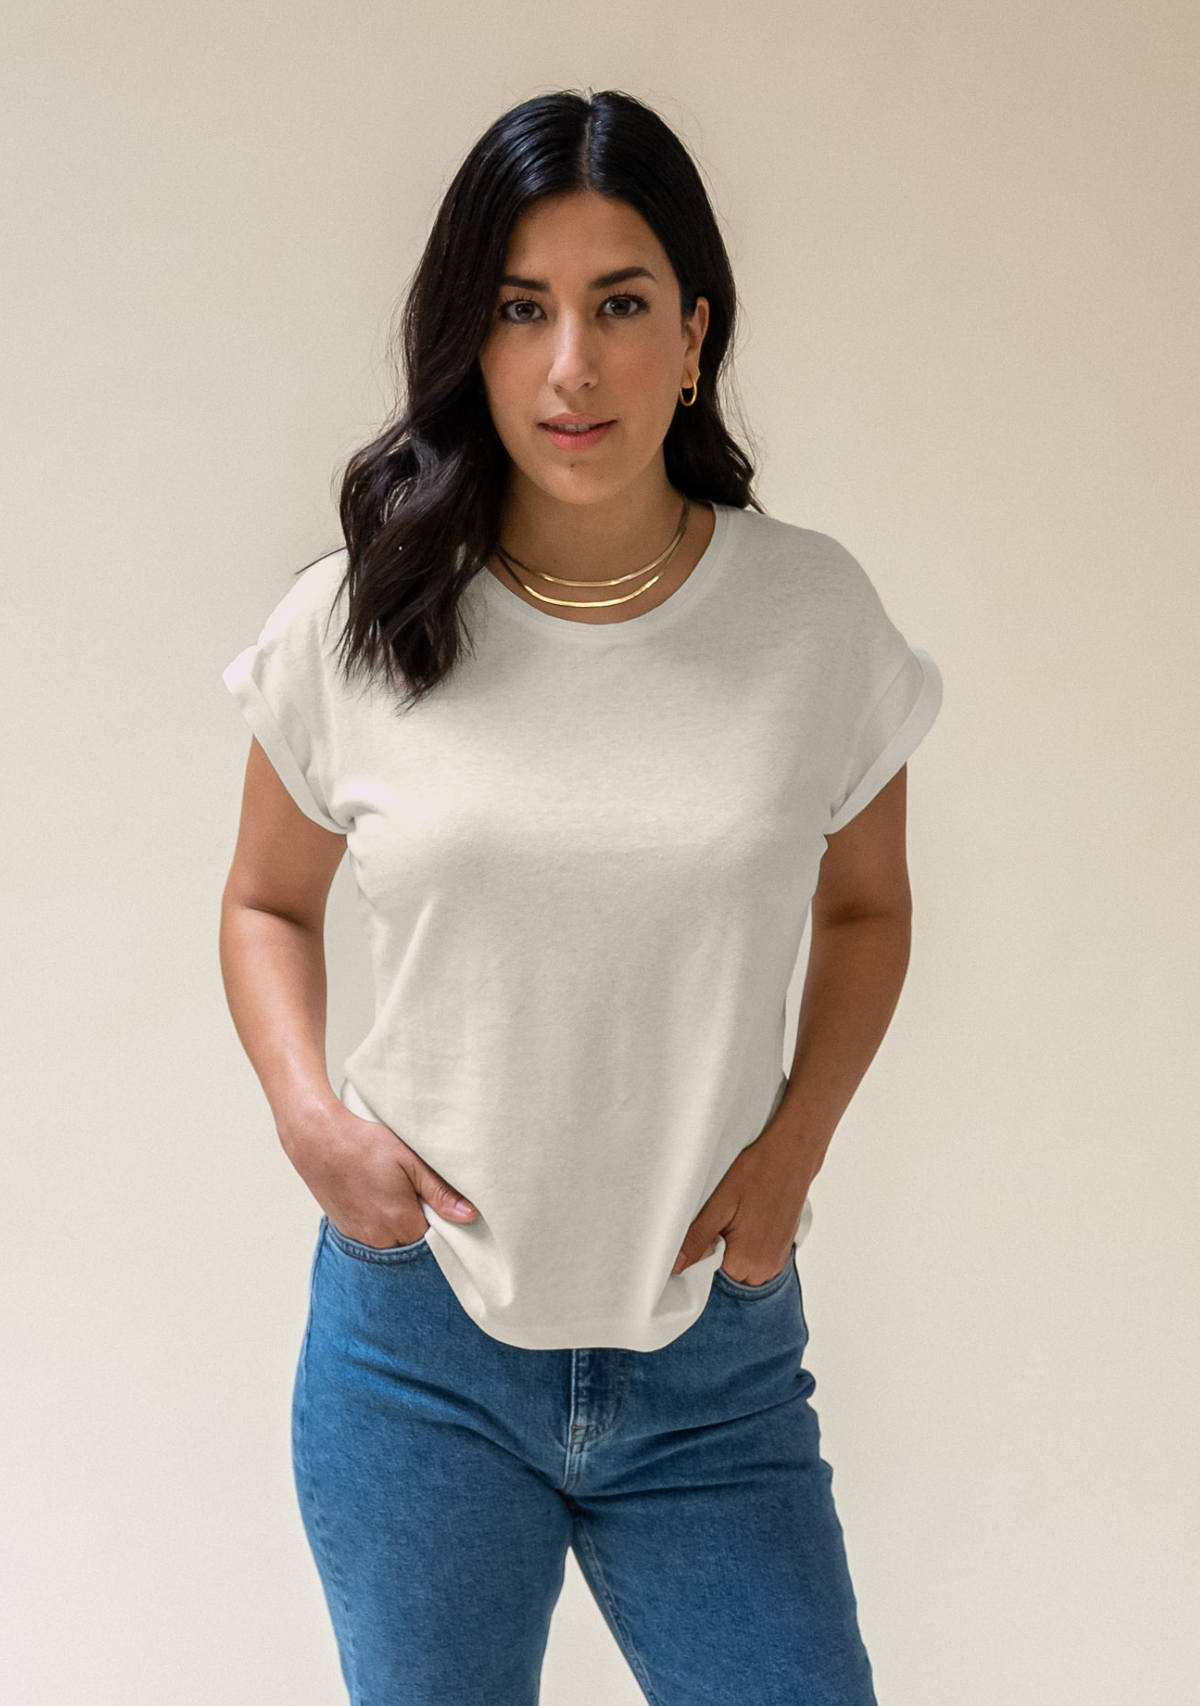 Women's Hemp Tee in the fresh color natural is made from a blend of Hemp and Organic Cotton Jersey sizex XS-3X Made in America Sustainable Women's Tee